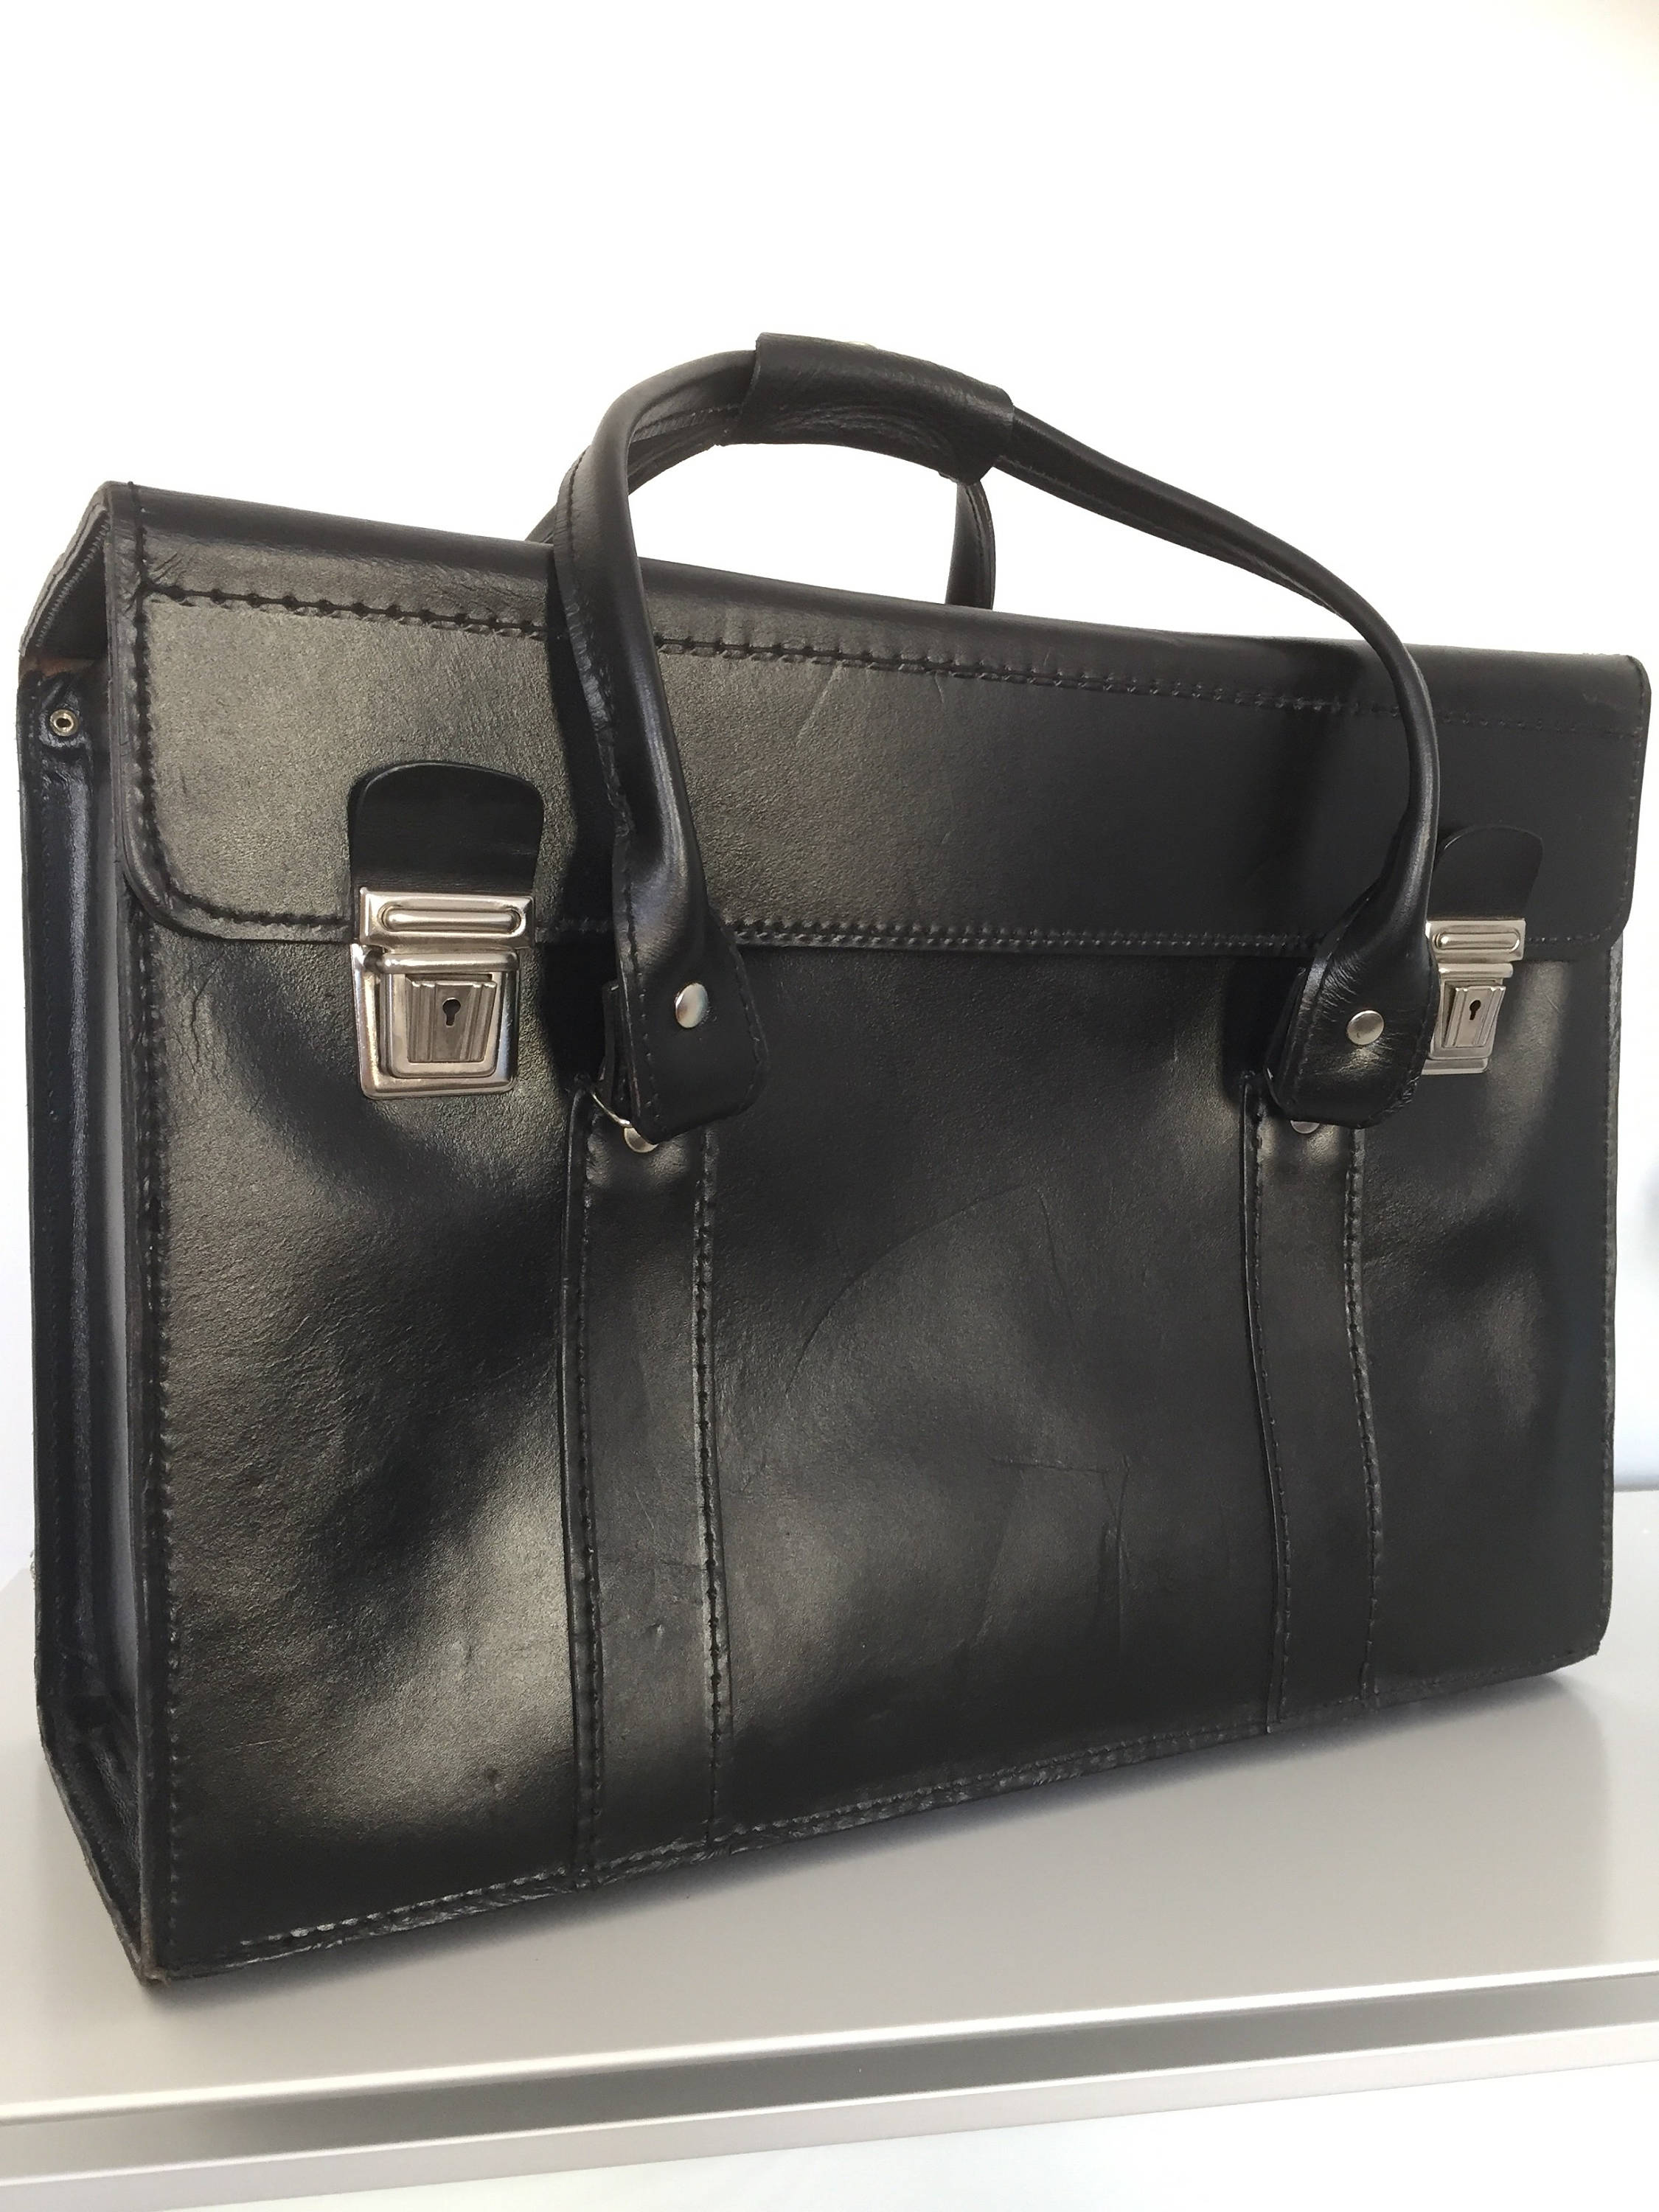 Mens vintage leather tote attasche valais luggage carryon black leather ...